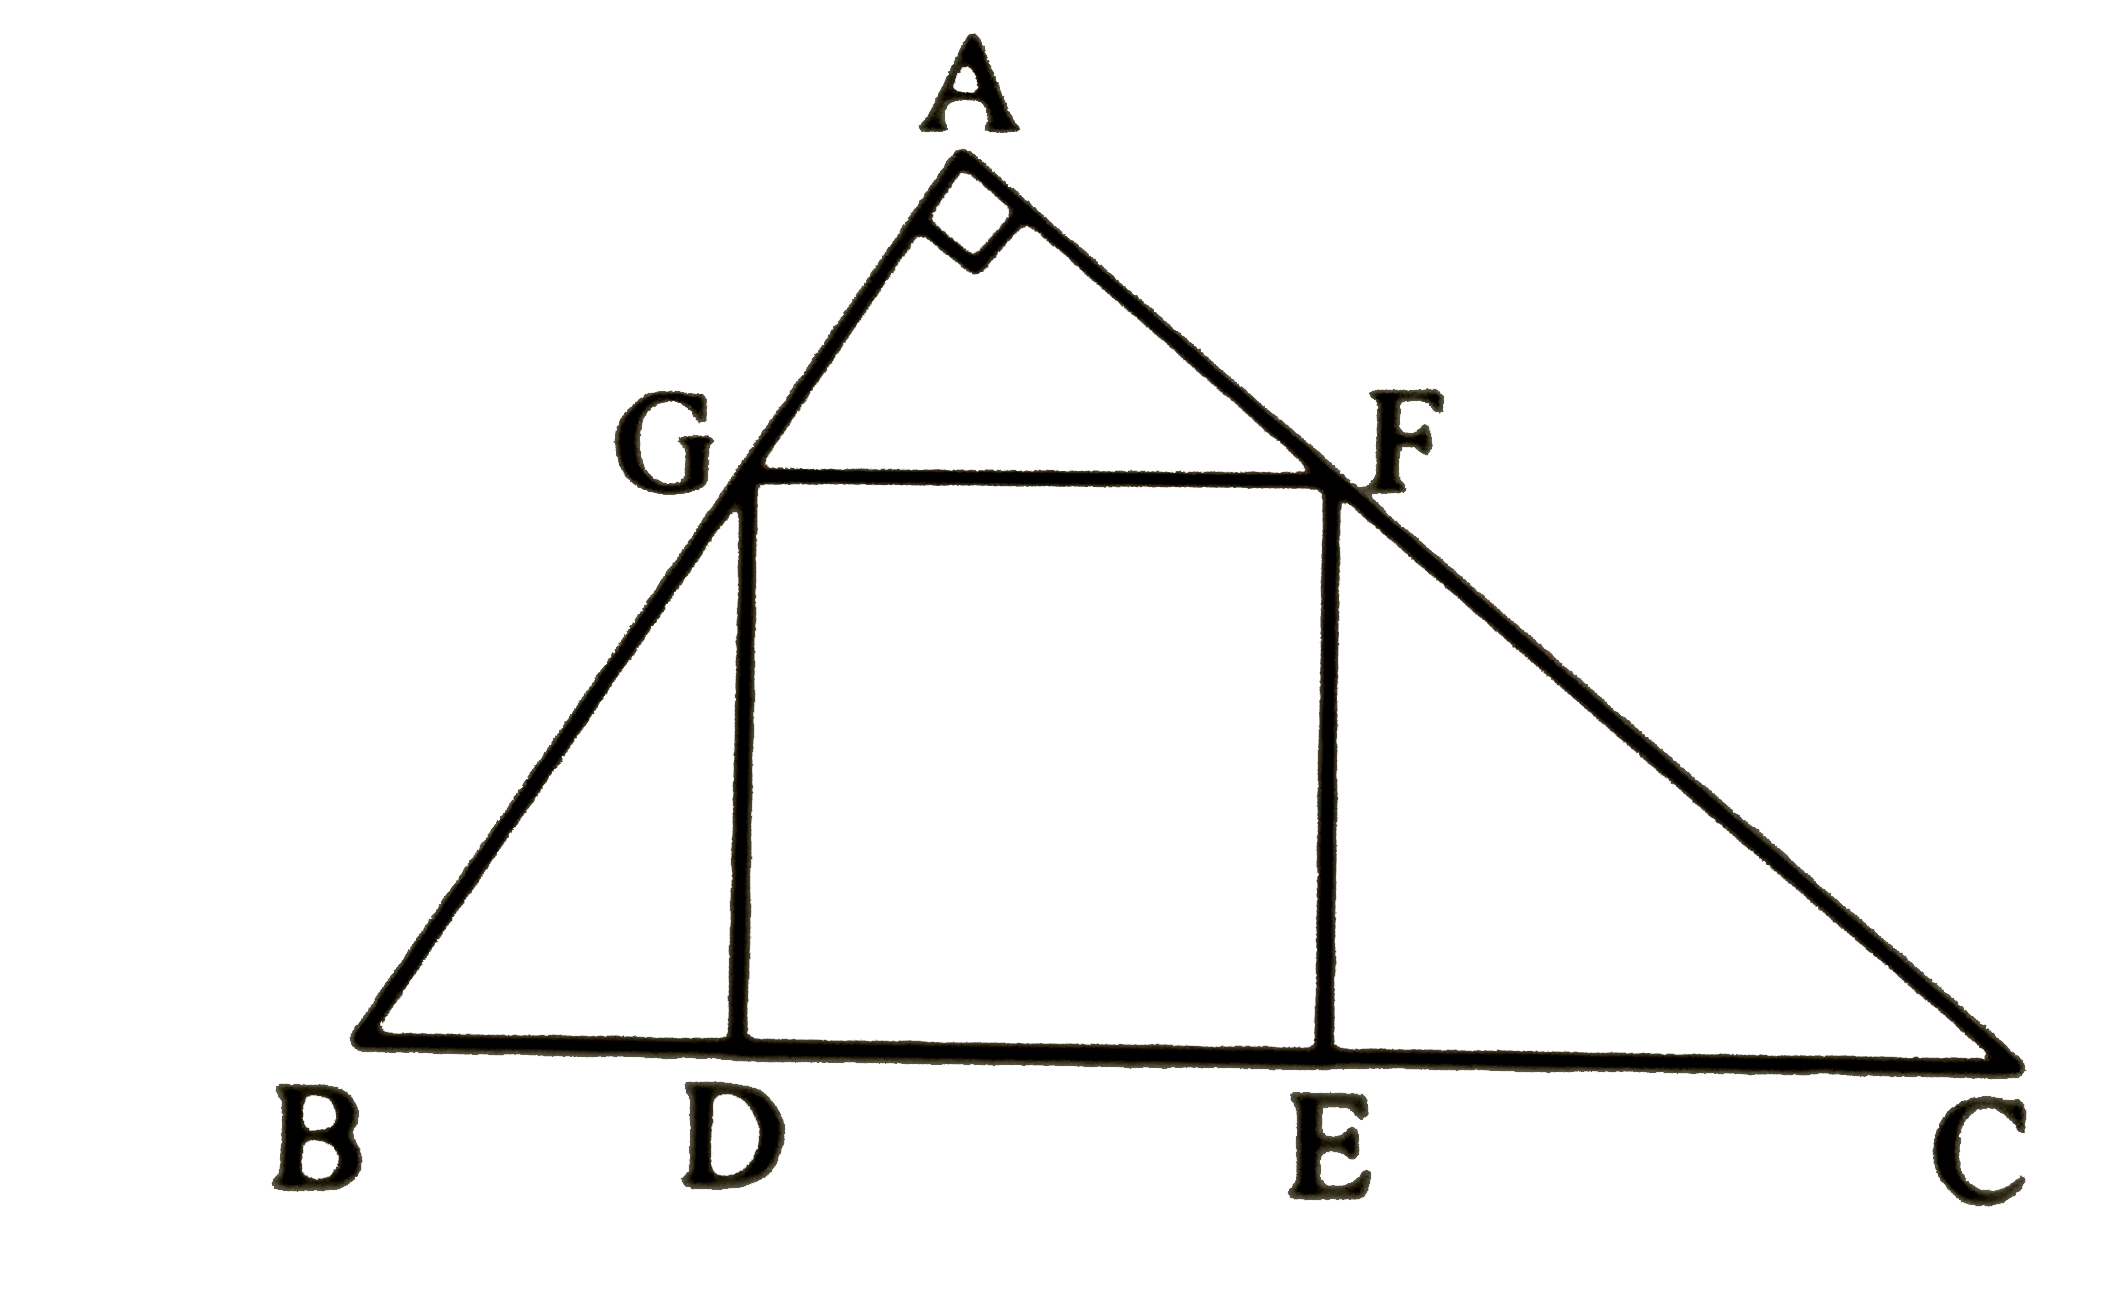 In the adjoining figure, the vertices of square DEFG are on the sides of DeltaABC. If angleA = 90^@, then prove that DE^2  = BD xx EC.